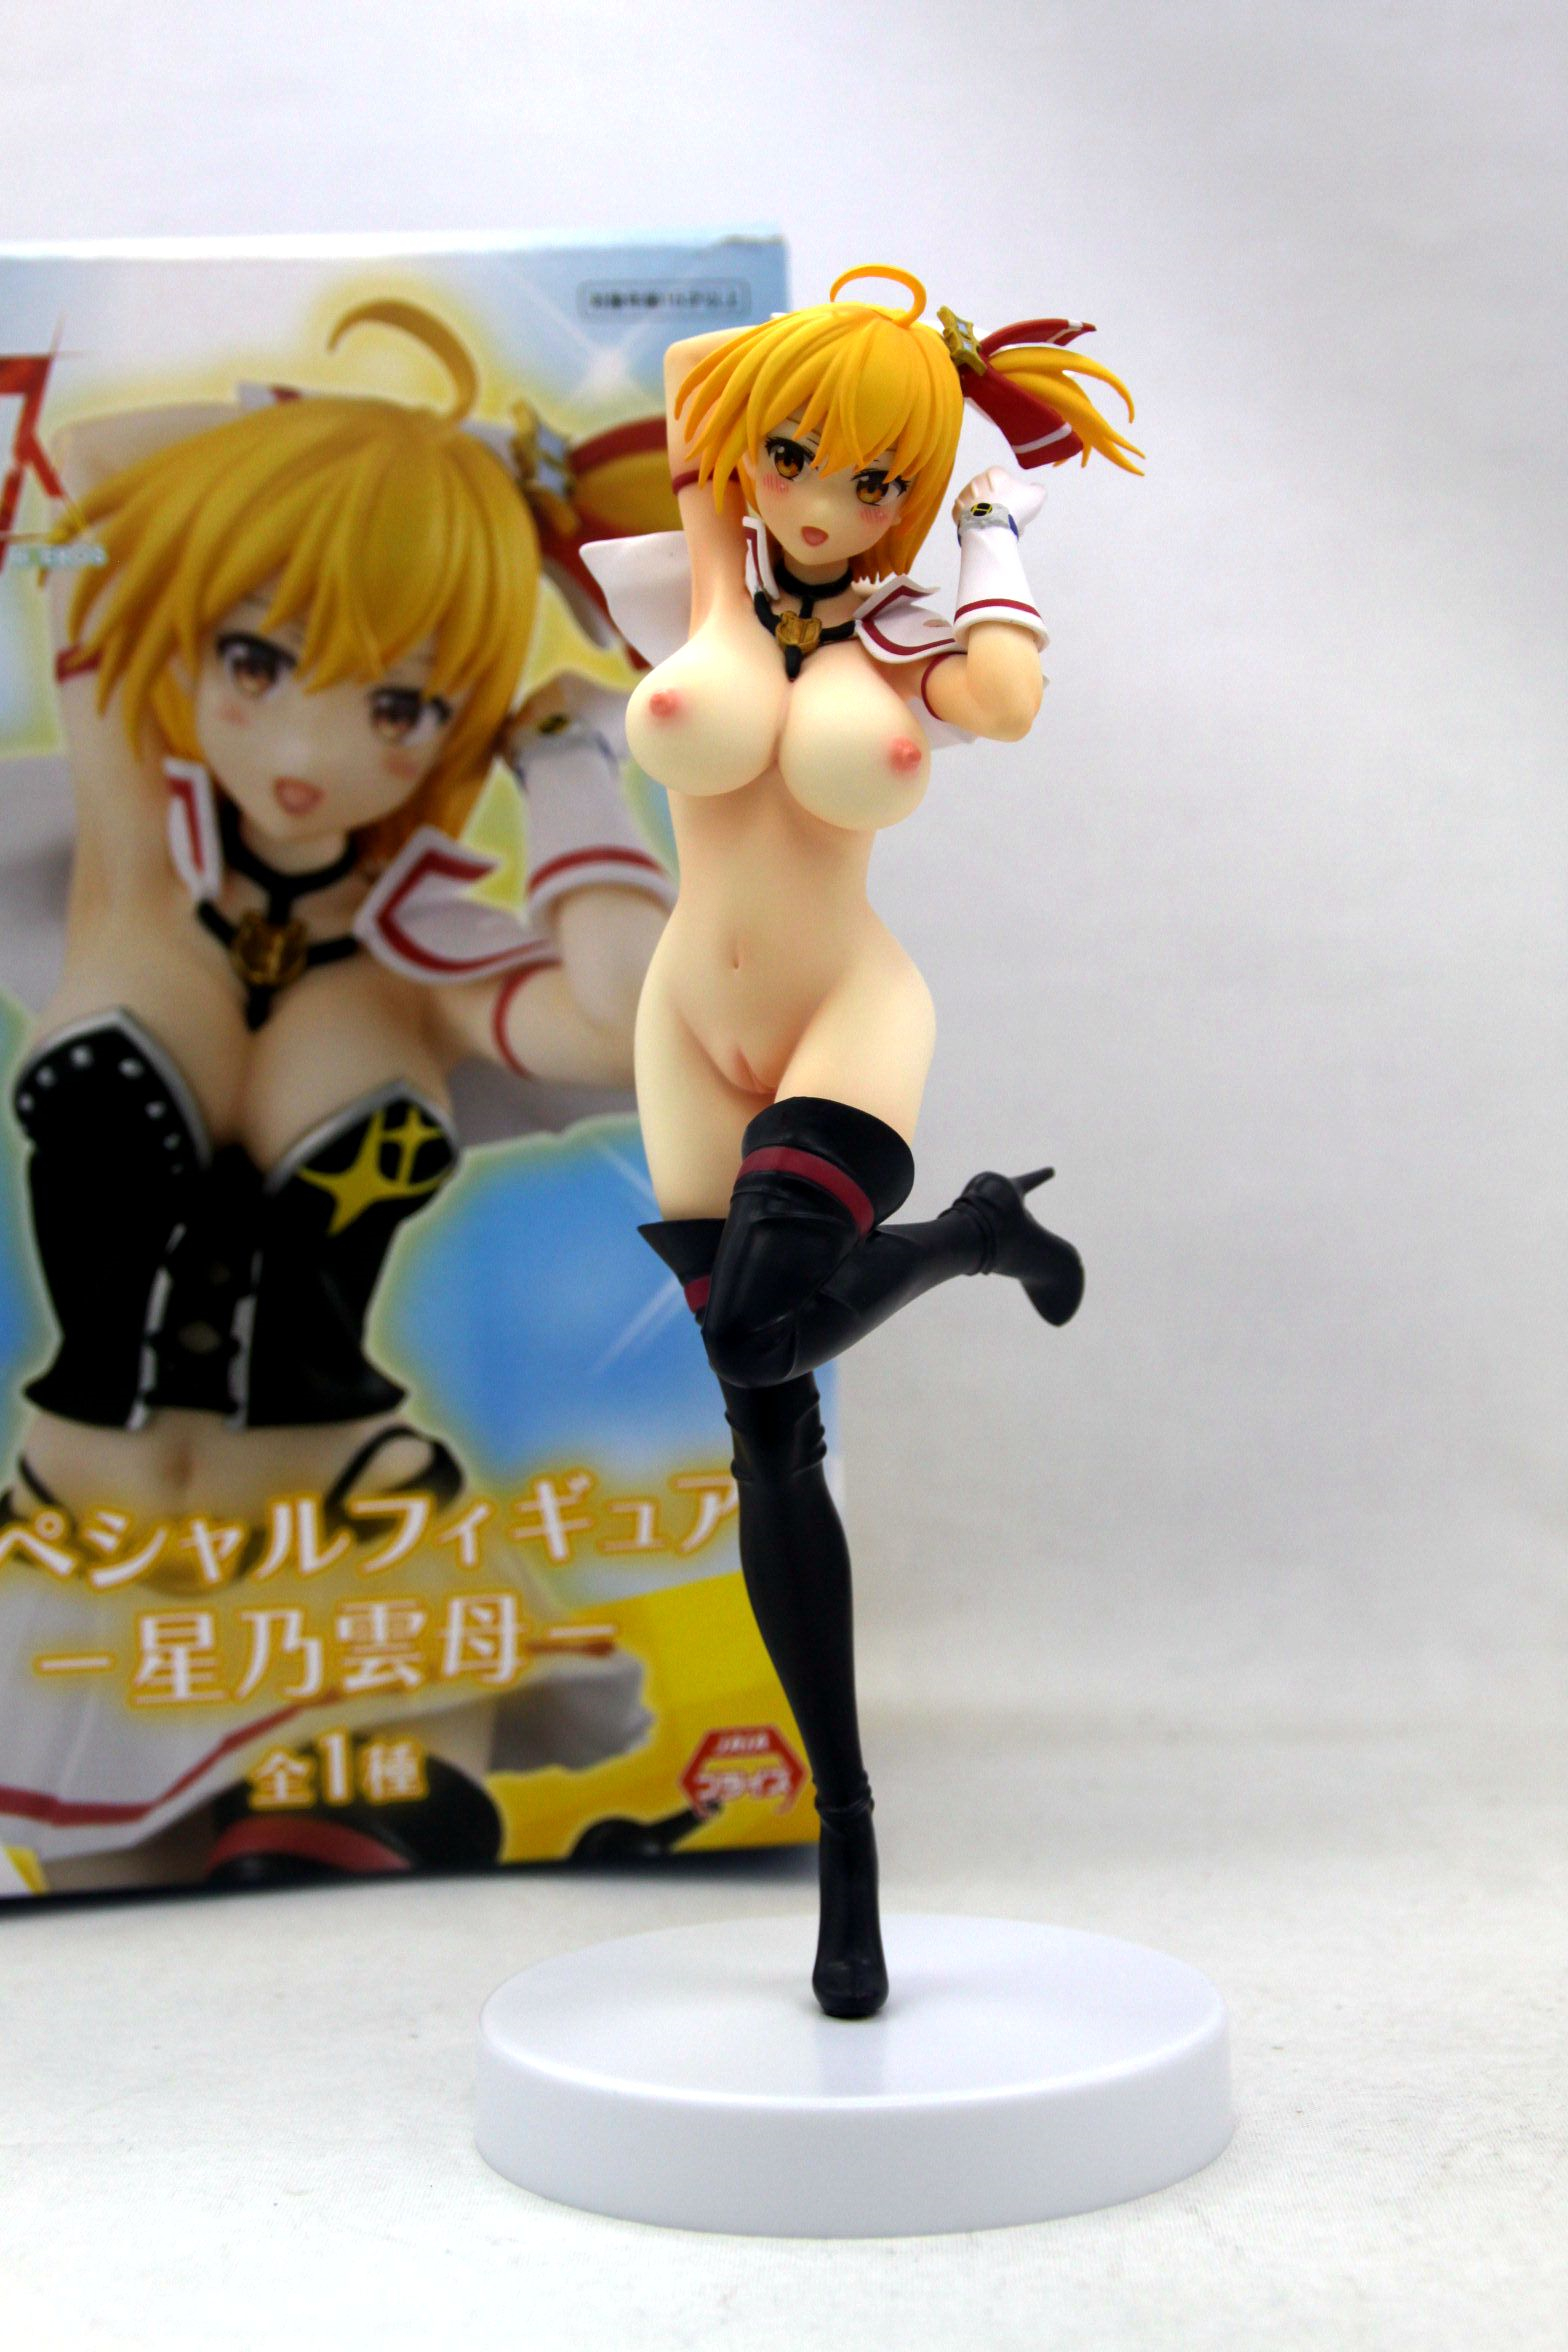 Naked anime statue